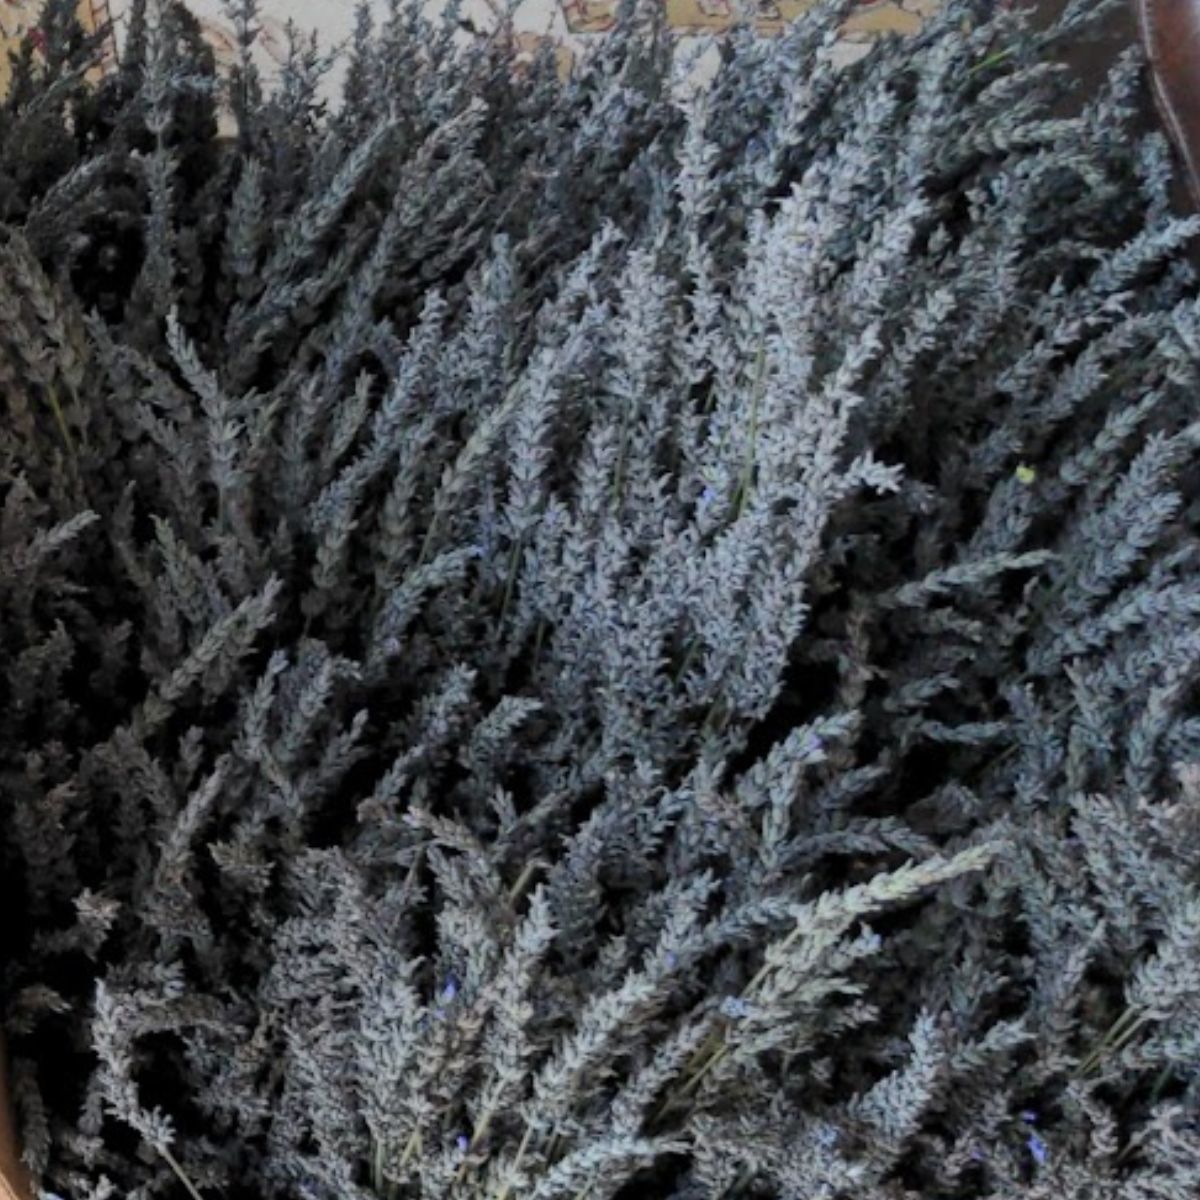 Dry lavender bunches in a box.